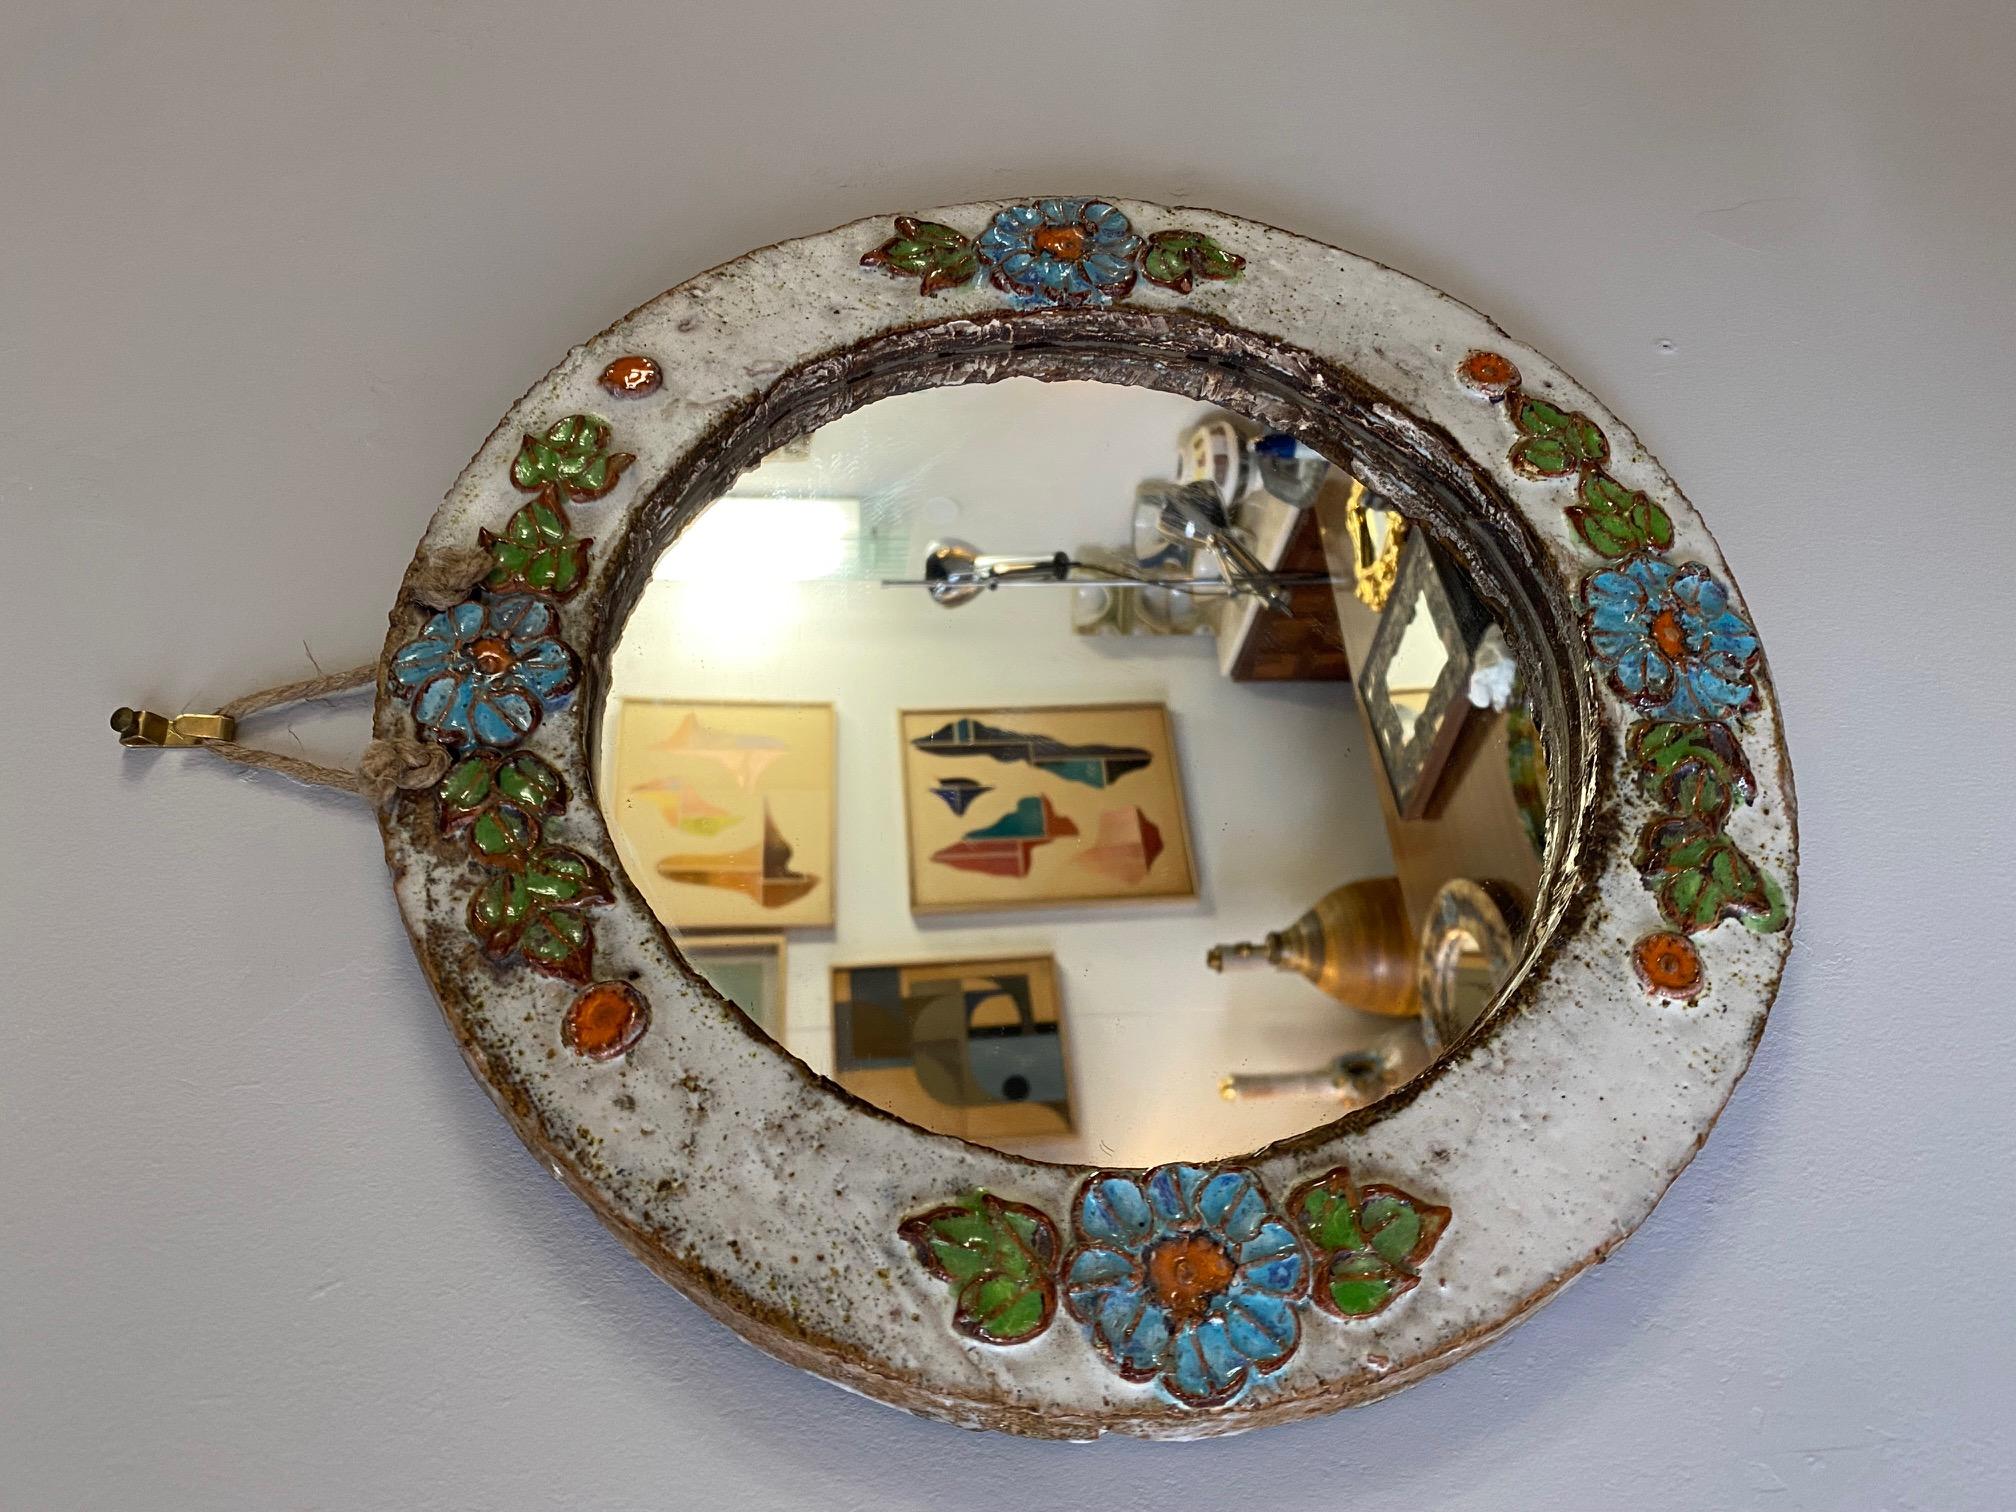 Ceramic mirror by La Roue Vallauris, France, 1960s
This company opened in 1962 and was run by Alexandre and Betty Fadas. La Roue was an outlet which sold ceramics in the town of Vallauris.